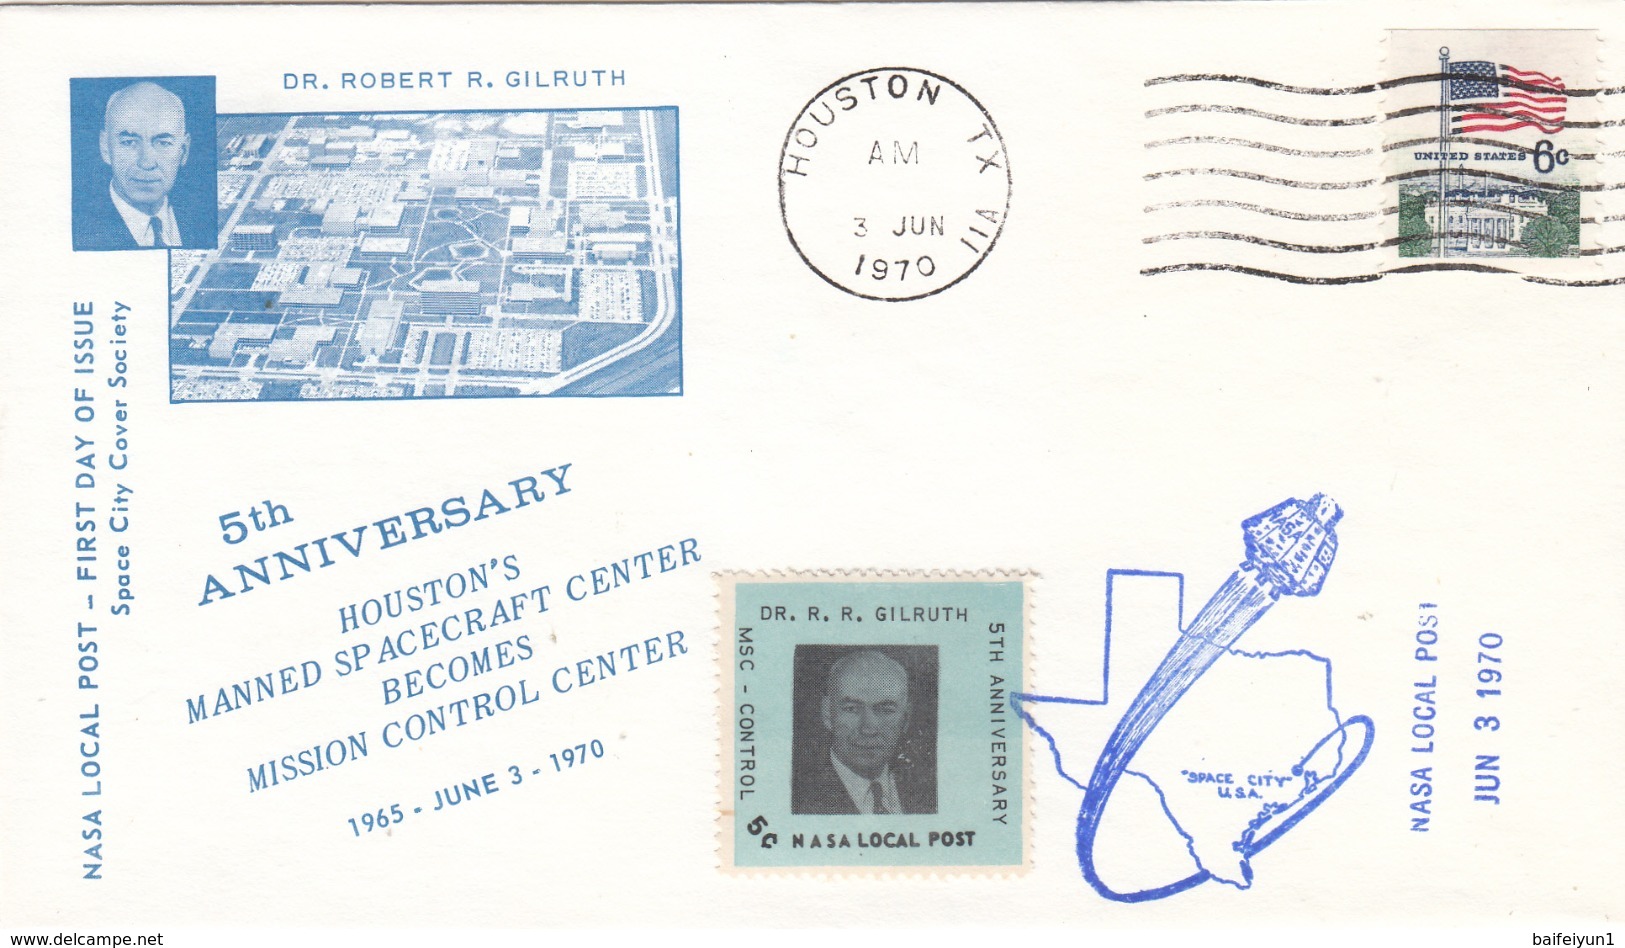 USA 1970 5th Anniversary HONSTON's Manned Spacecraft Center Becomes Mission Control Center Commemorative Cover - North  America